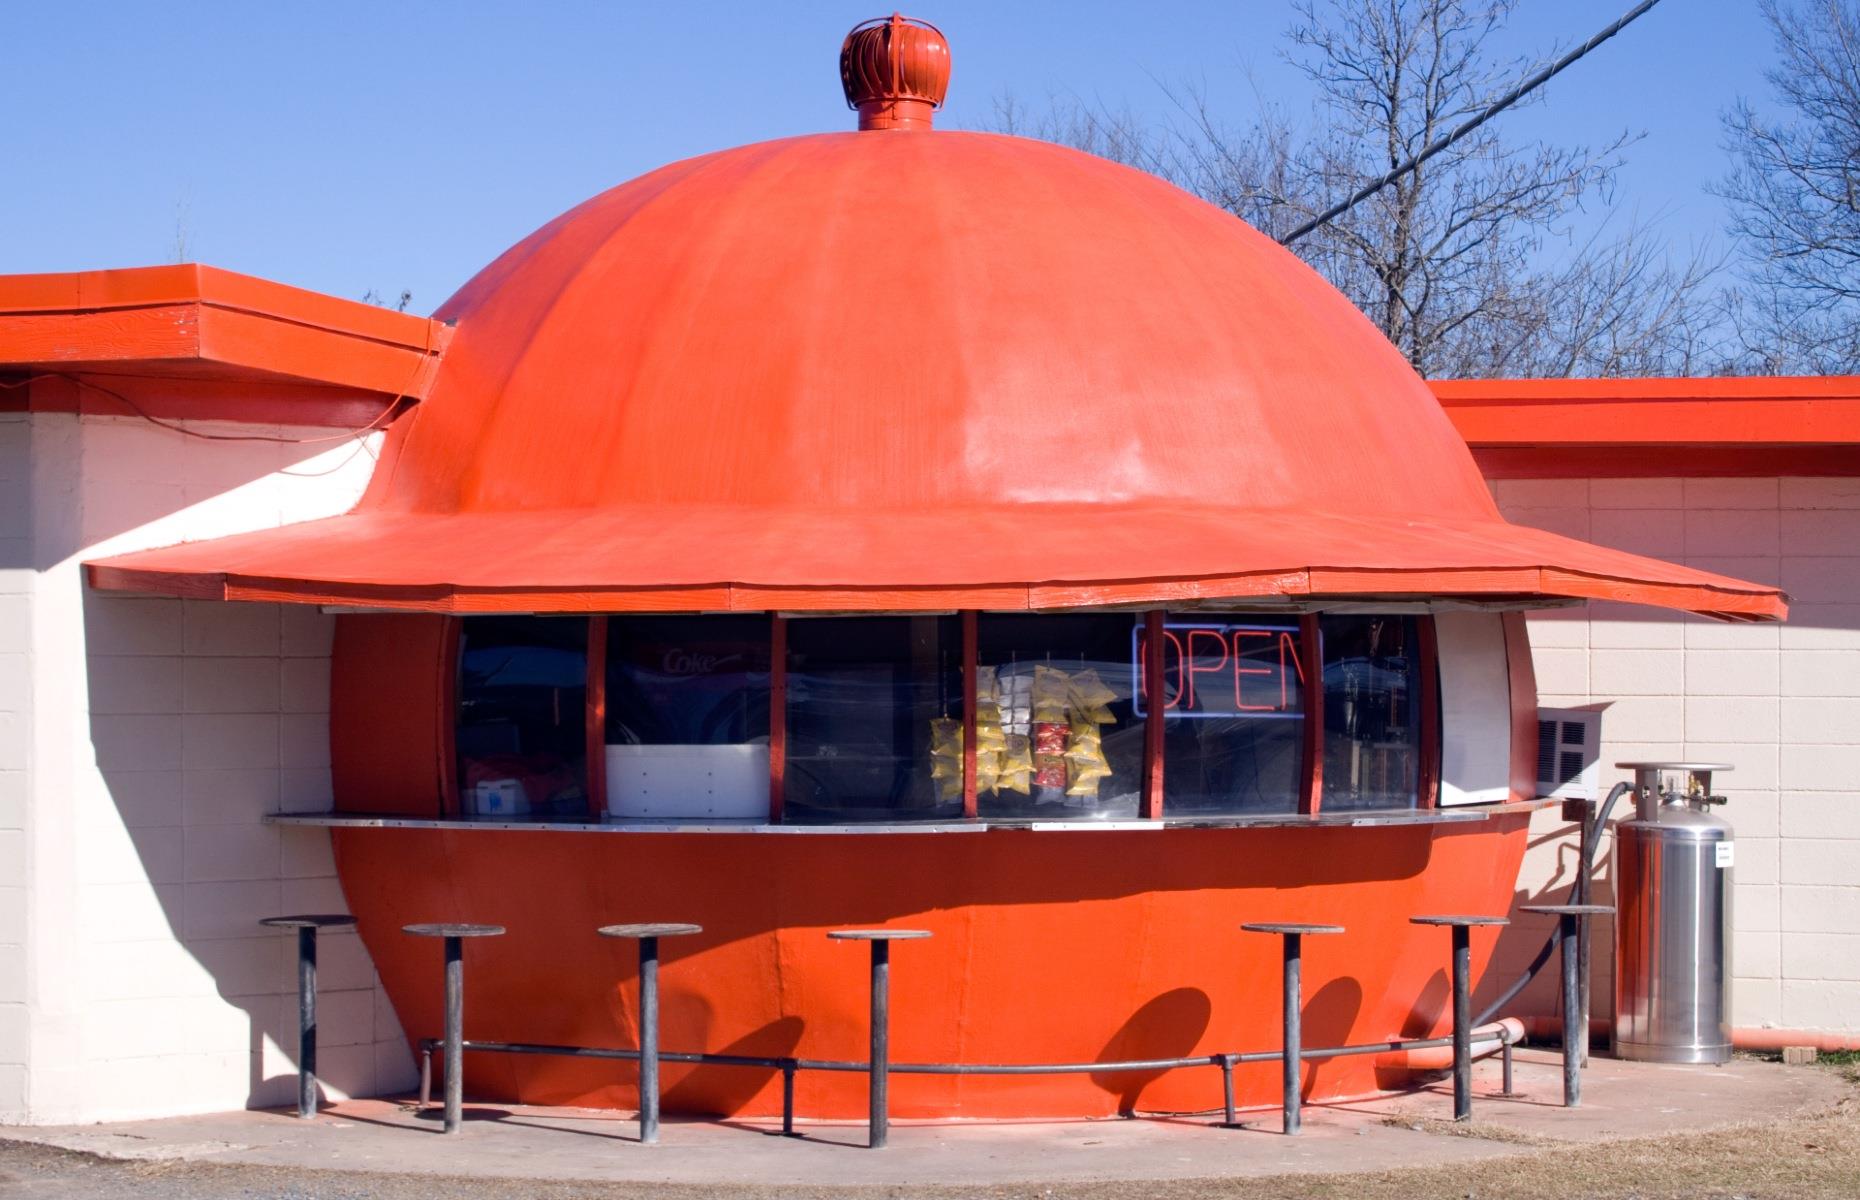 <p>If a giant orange by the roadside doesn’t seem strange enough, the fact that this is a burger restaurant – rather than a juice bar – makes this spot even more brilliantly bizarre. <a href="https://www.facebook.com/The-Mammoth-Orange-263920106815/">The Mammoth Orange</a> can be found just off the road between Little Rock and Pine Bluff, and was built in 1966, inspired by a similar restaurant in Fresno, California. The hot dogs and hamburgers are highly rated.</p>  <p><a href="http://bit.ly/3roL4wv"><strong>Love this? Follow our Facebook page for more travel inspiration</strong></a></p>